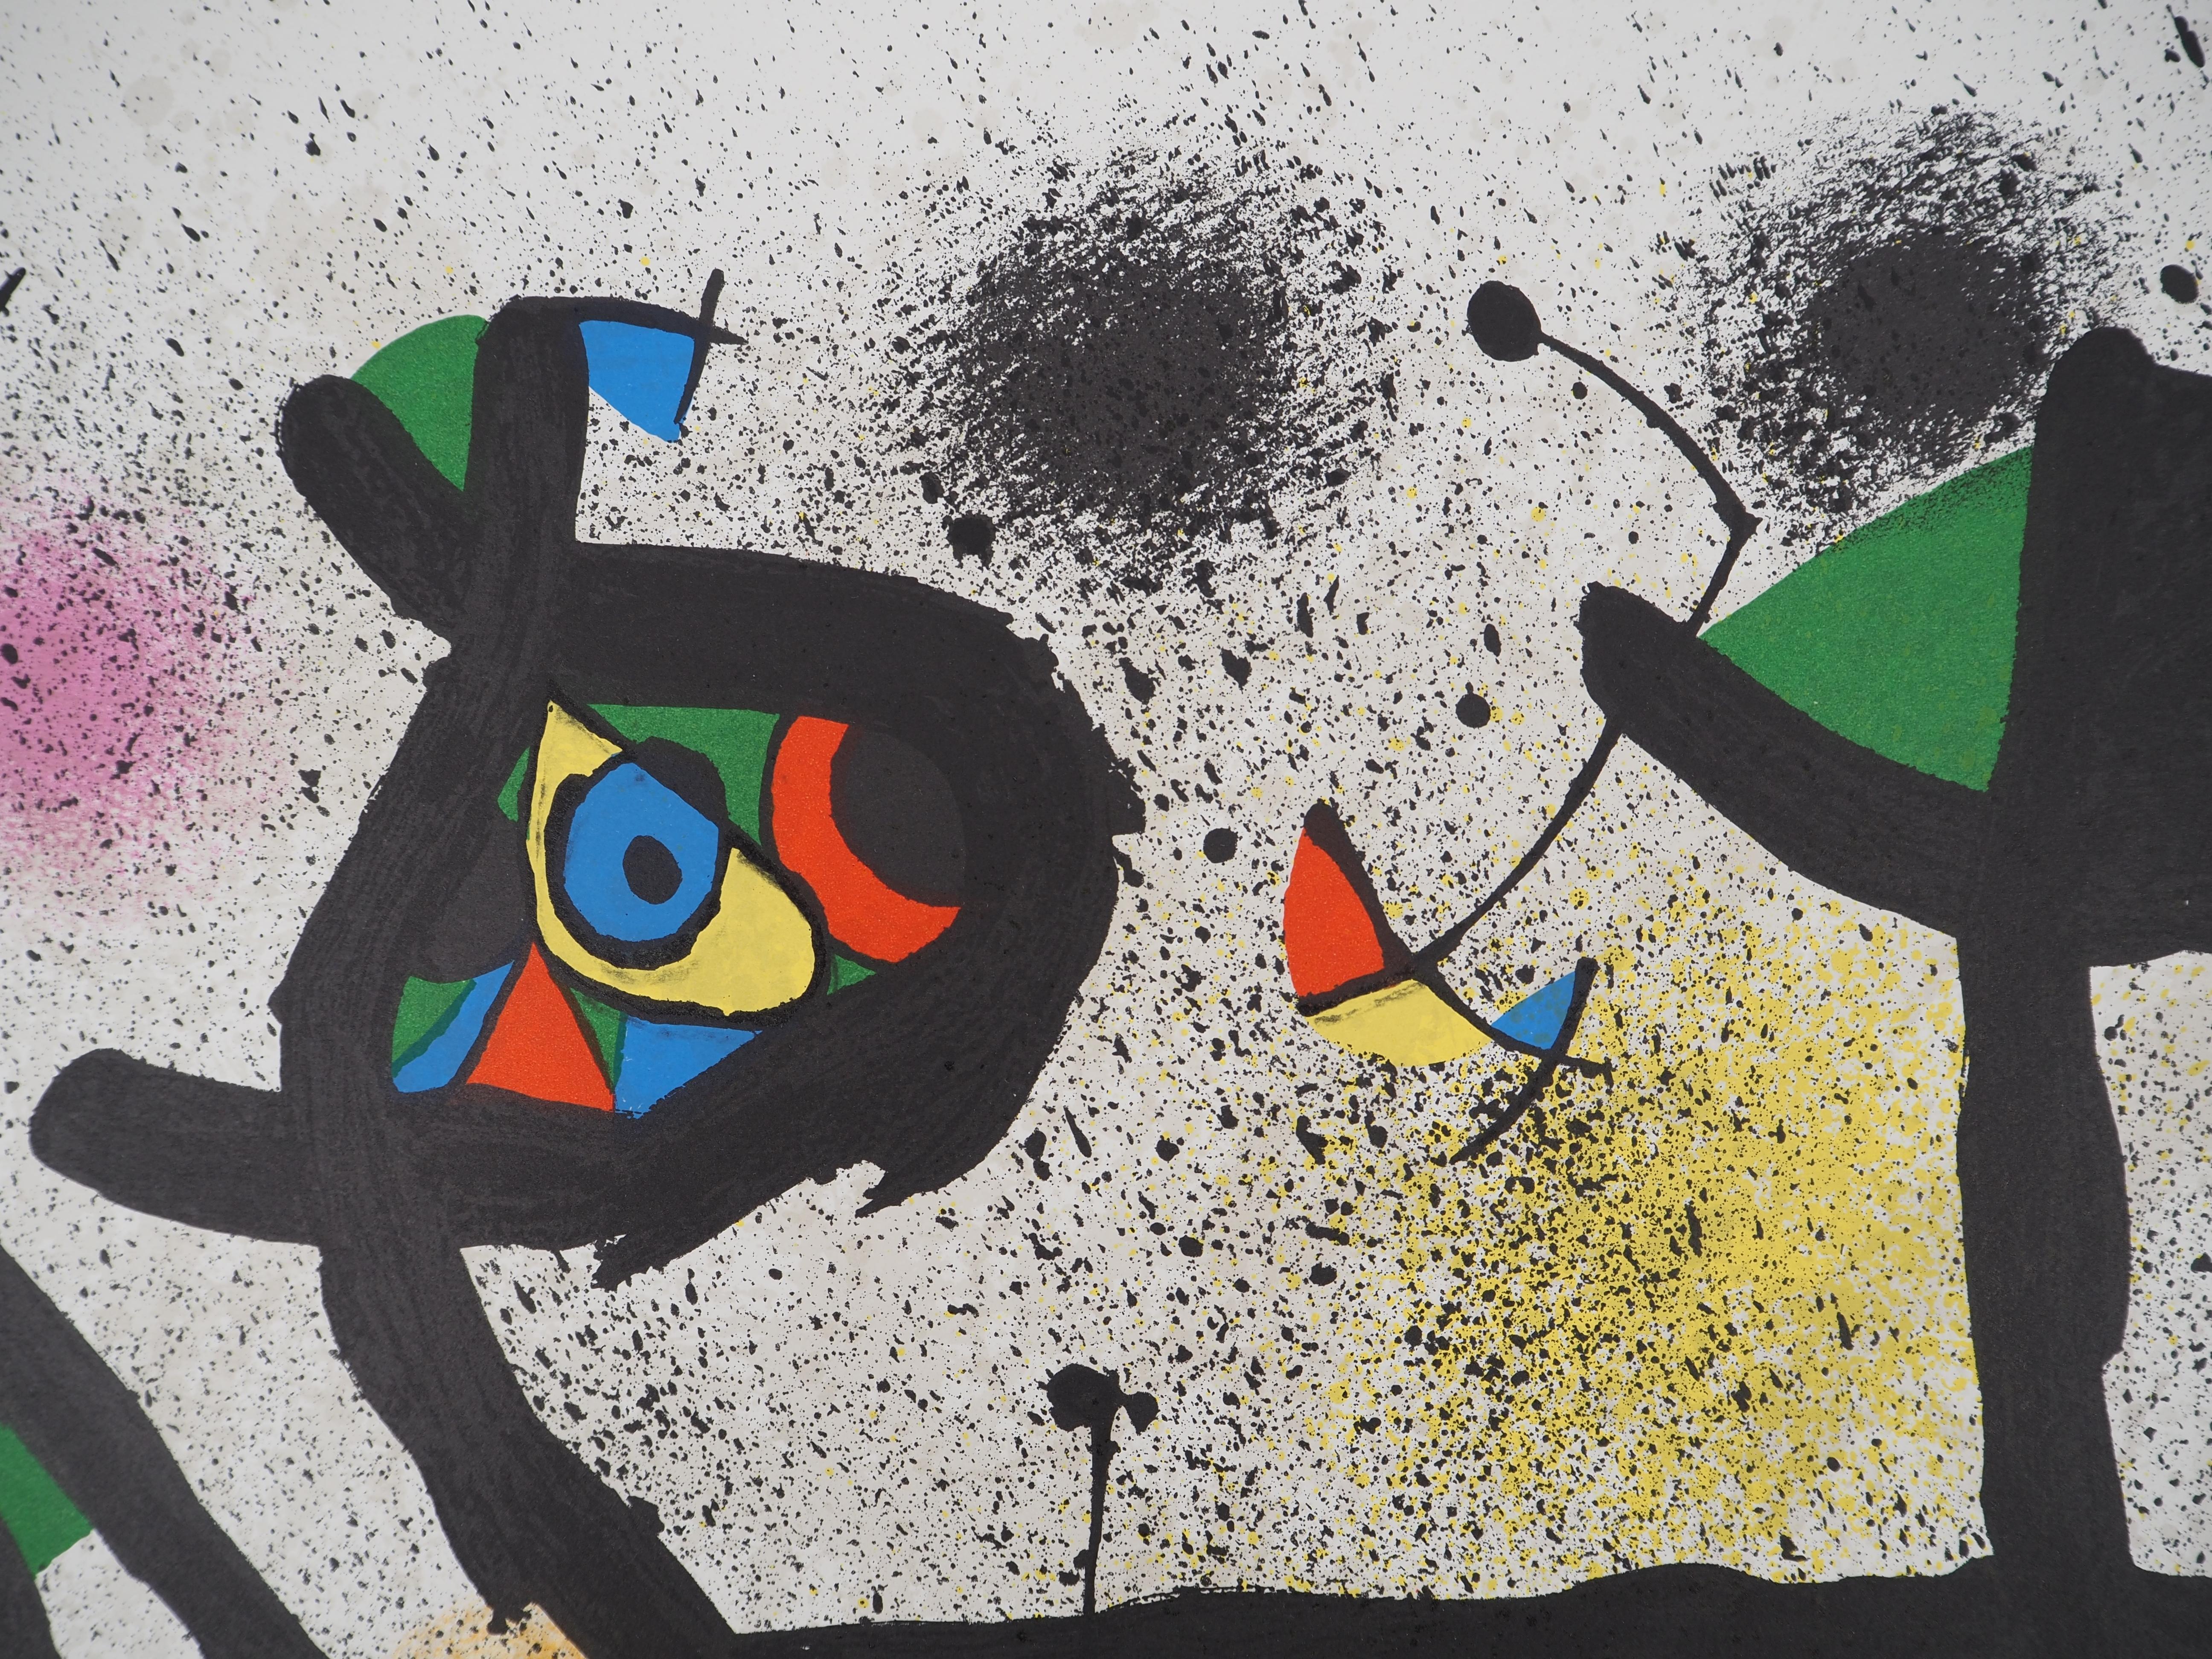 Joan Miro
Surrealist Garden (Sculptures), c. 1974

Original lithograph
Signed in the plate
On Arches vellum, size 54 x 76 cm (c. 21 x 30 inch)

REFERENCE : catalog raisonne 